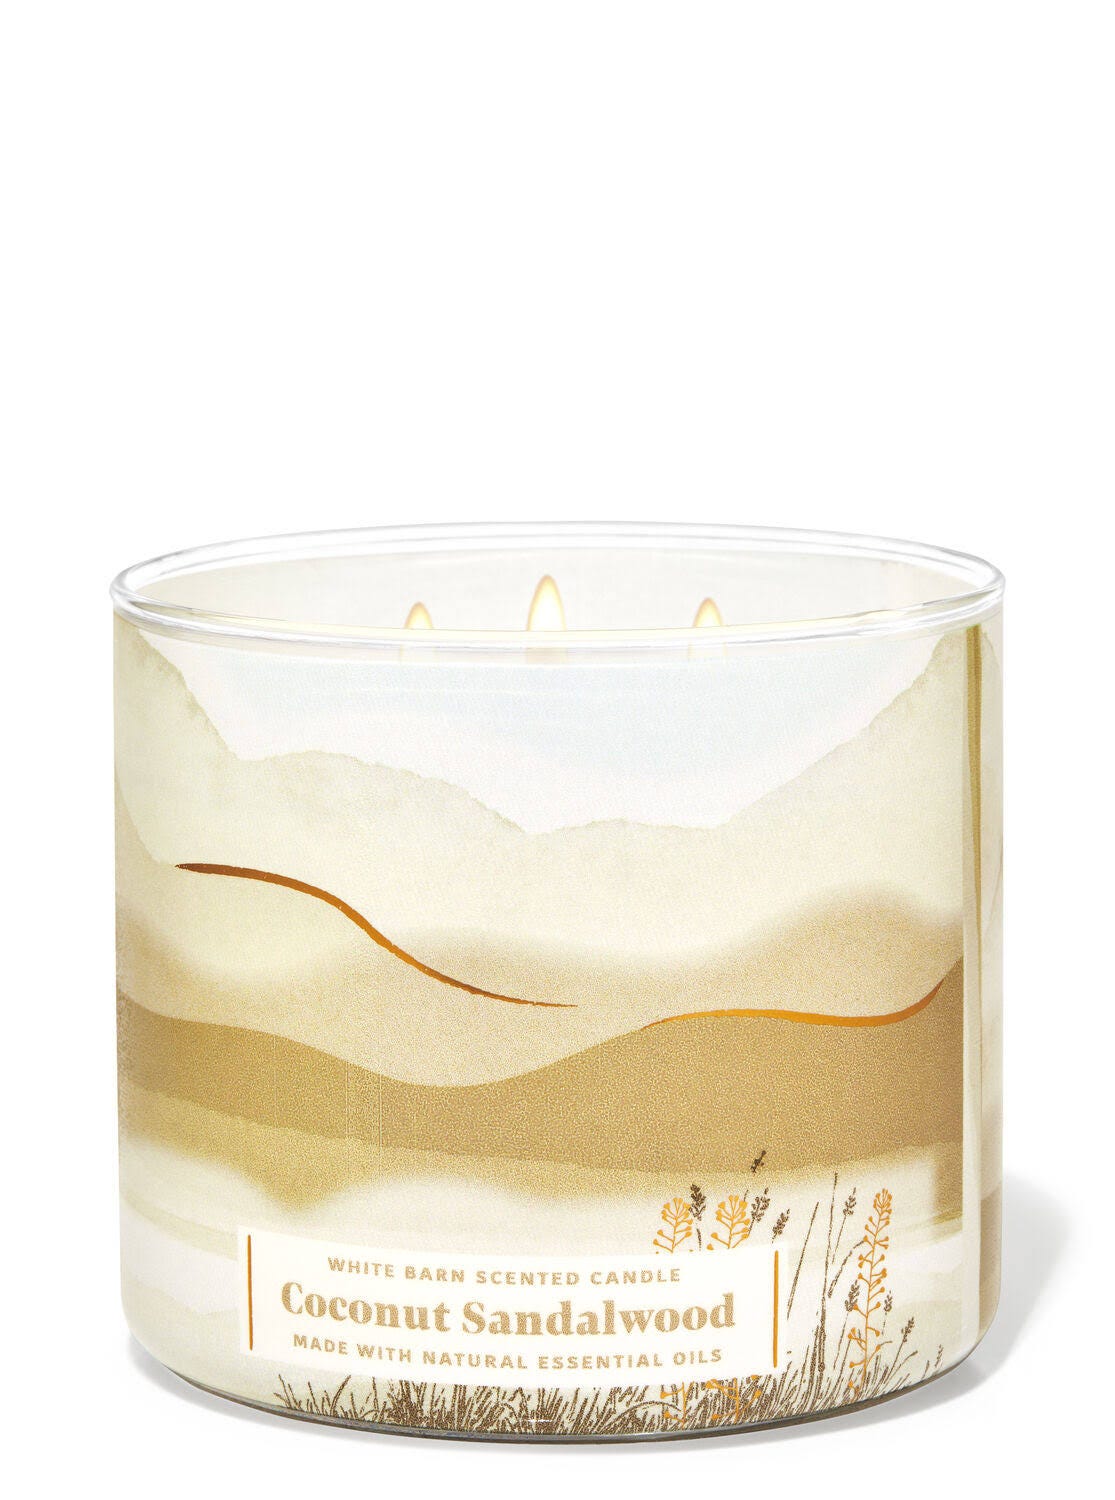 White Barn Coconut Sandalwood 3-Wick Candle (Soy Wax, 4in x 4in x 3.5in) by Bath & Body Works | Image